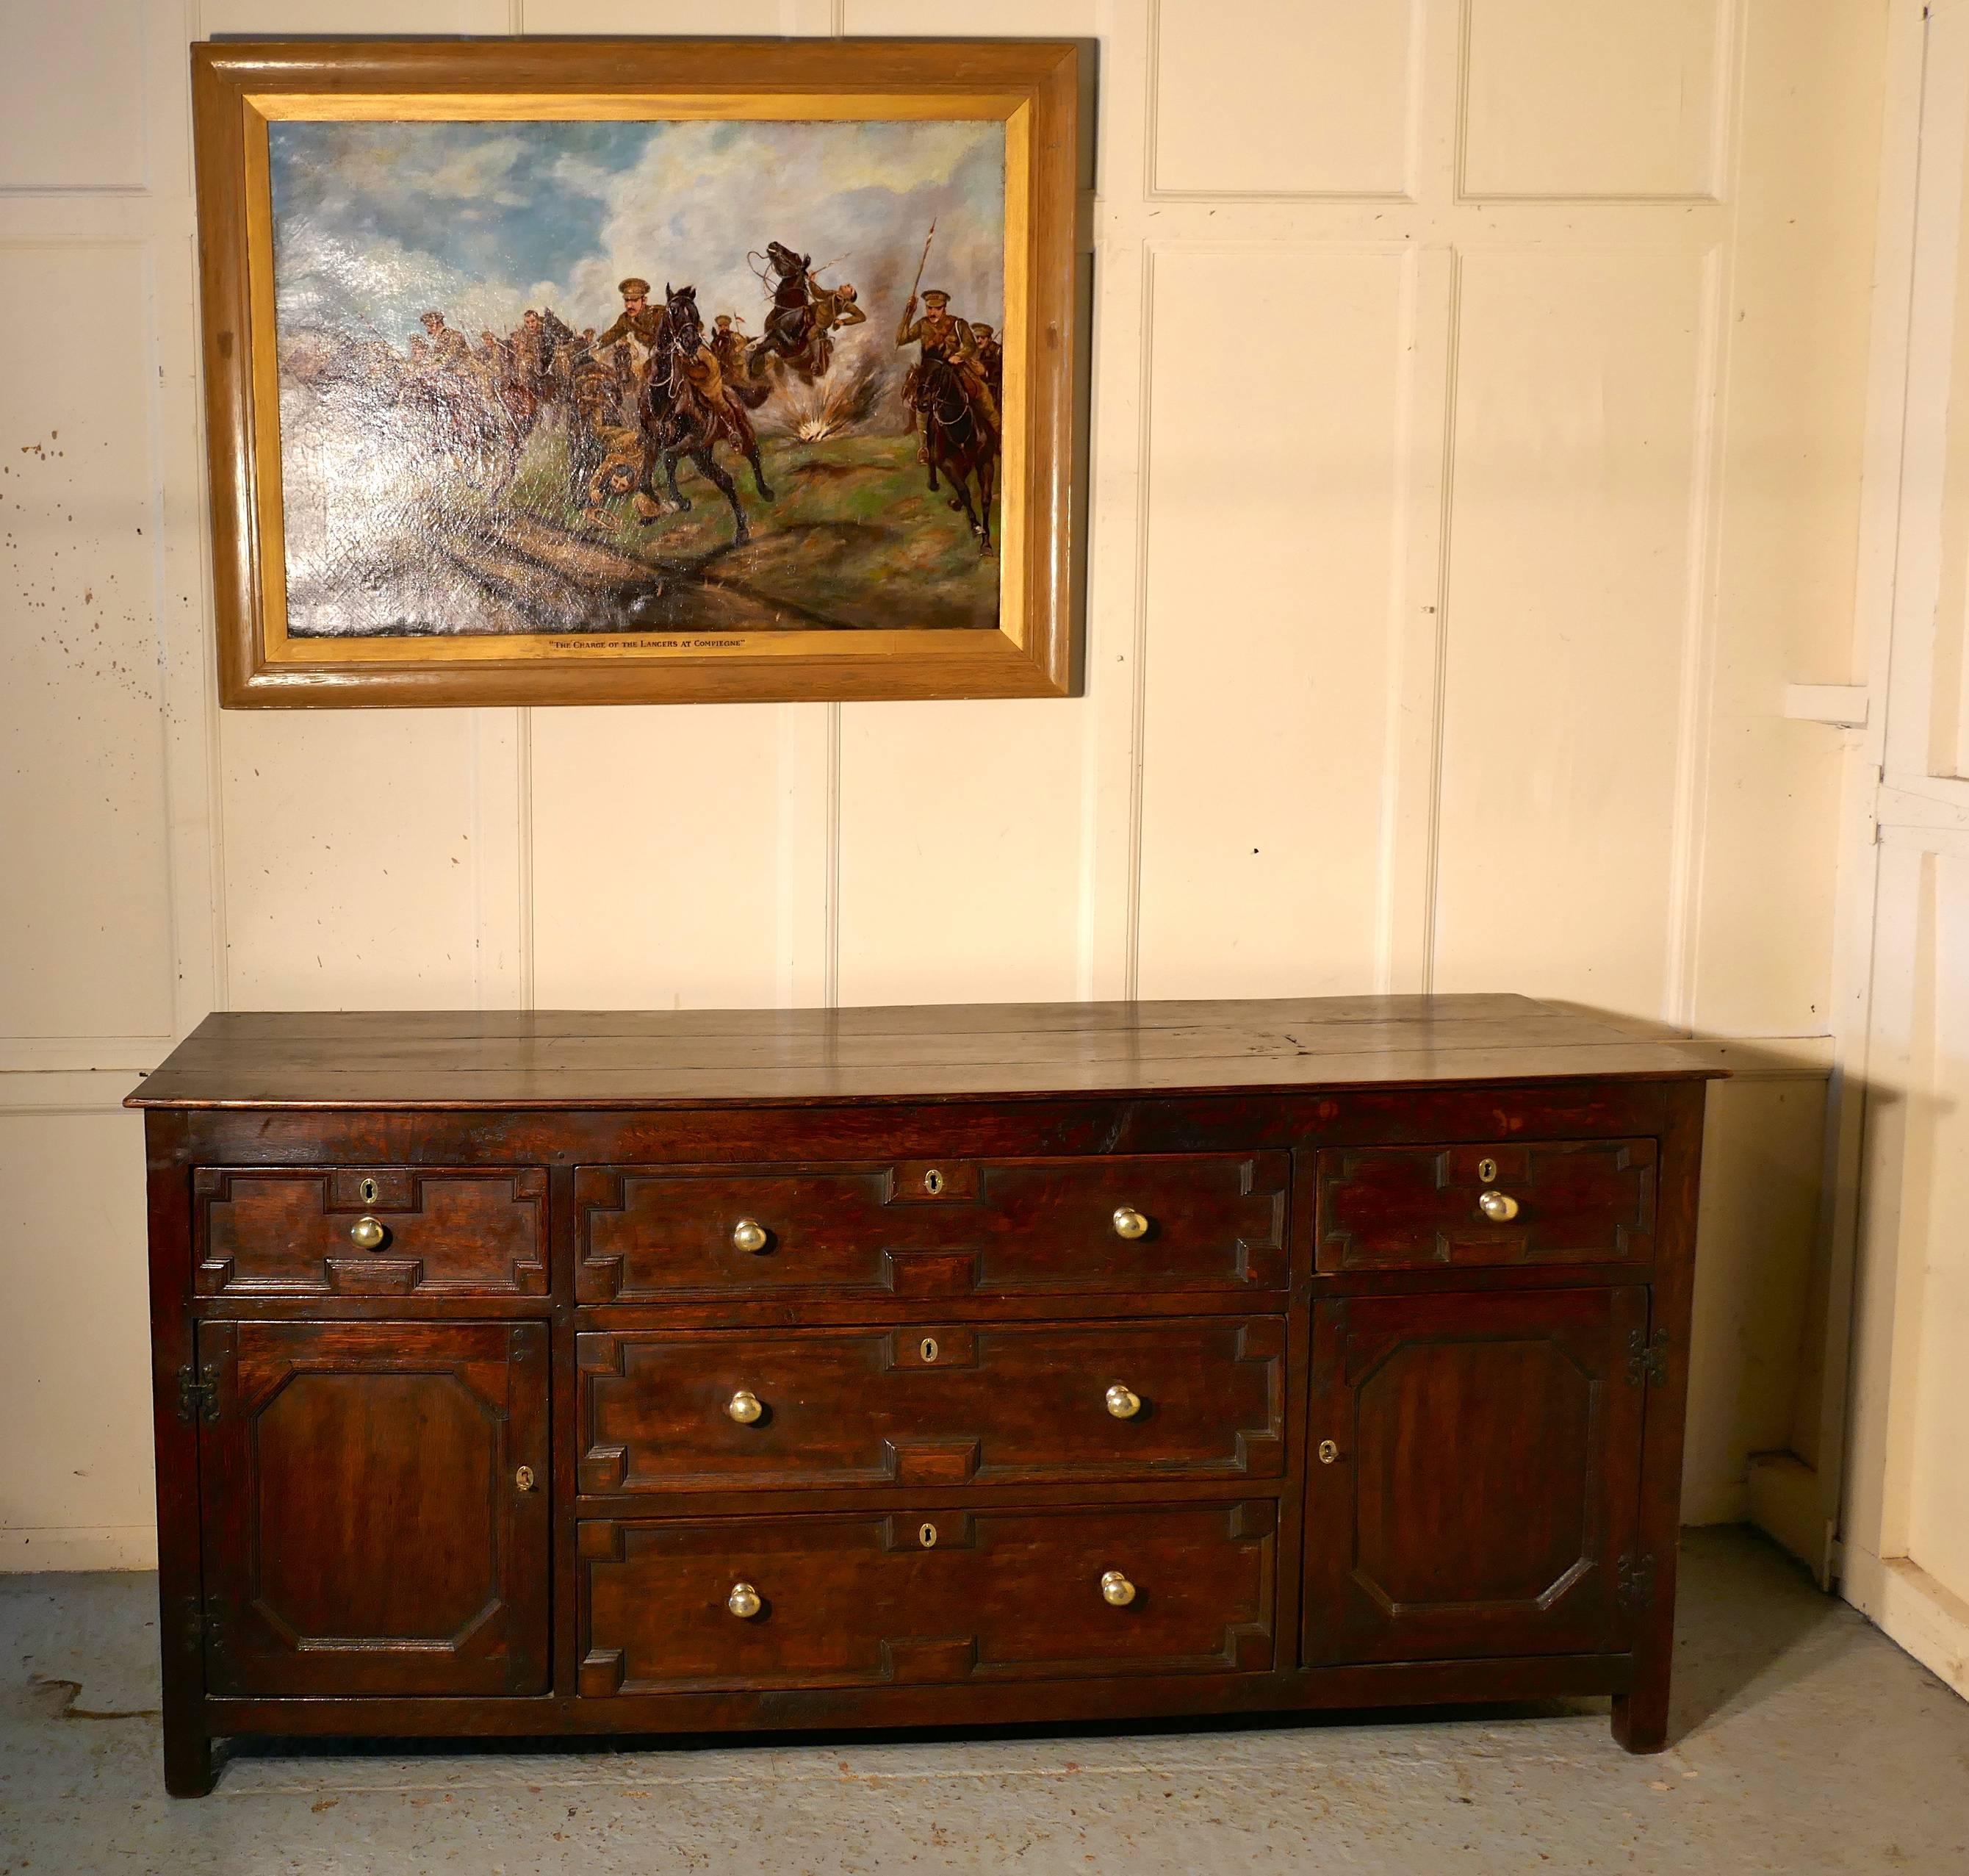 18th century oak long dresser base

This is fine looking piece, dating from the mid-18th century
The dresser has a three plank top, it has a bank of three graduated drawers in the centre, flanked on each side by a panelled cupboard door with a